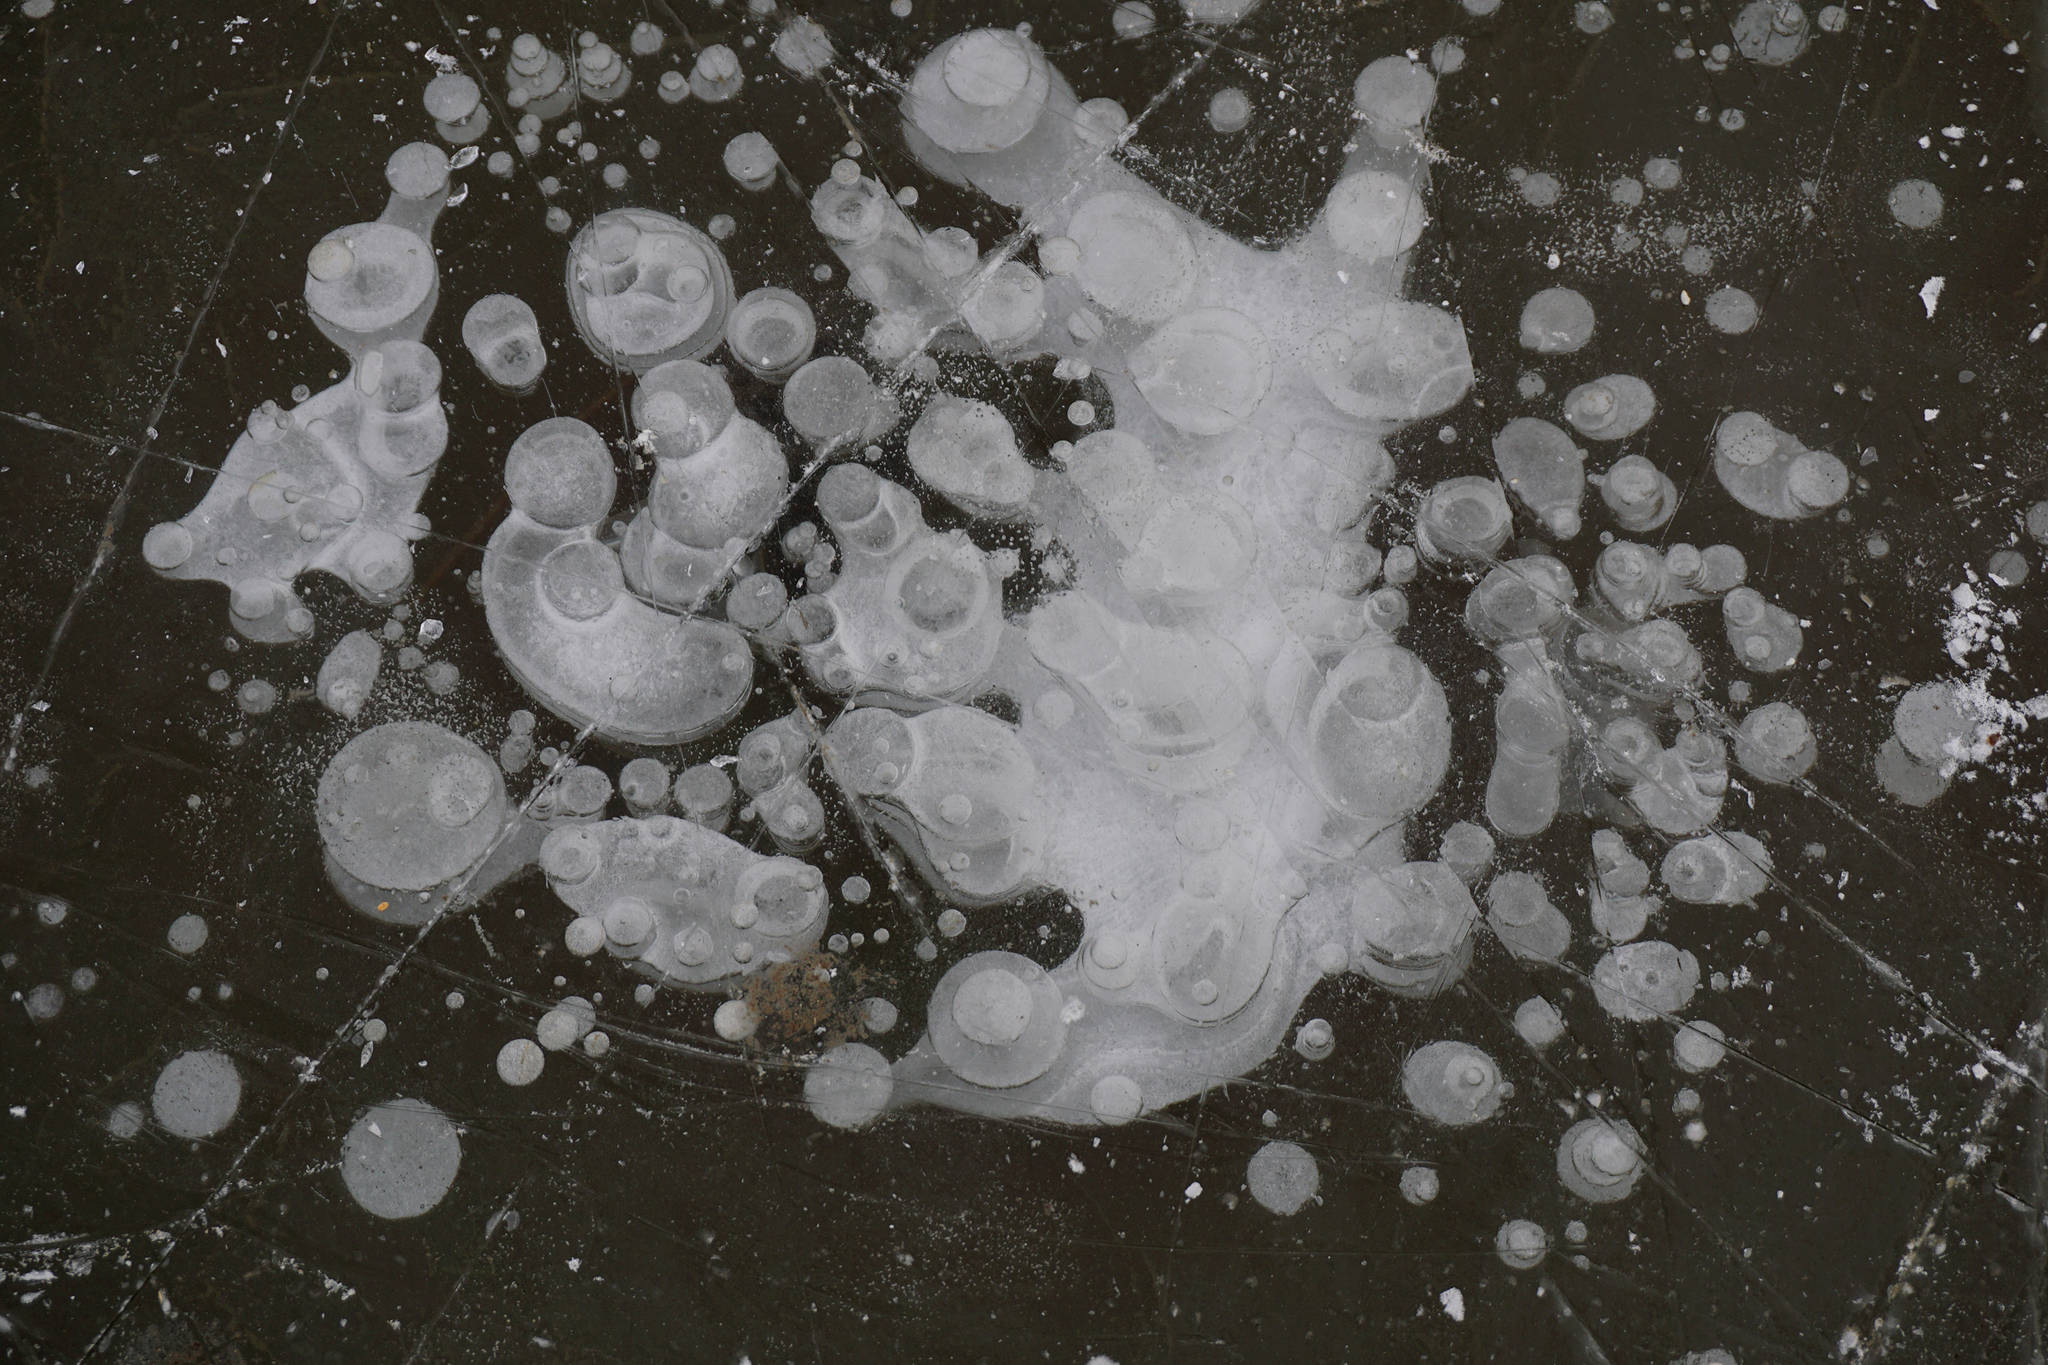 Bubbles from methane gas have frozen in Beluga Lake, creating abstract shapes as seen here on Thursday, Nov. 5, 2020, in Homer, Alaska. (Photo by Michael Armstrong/Homer News)